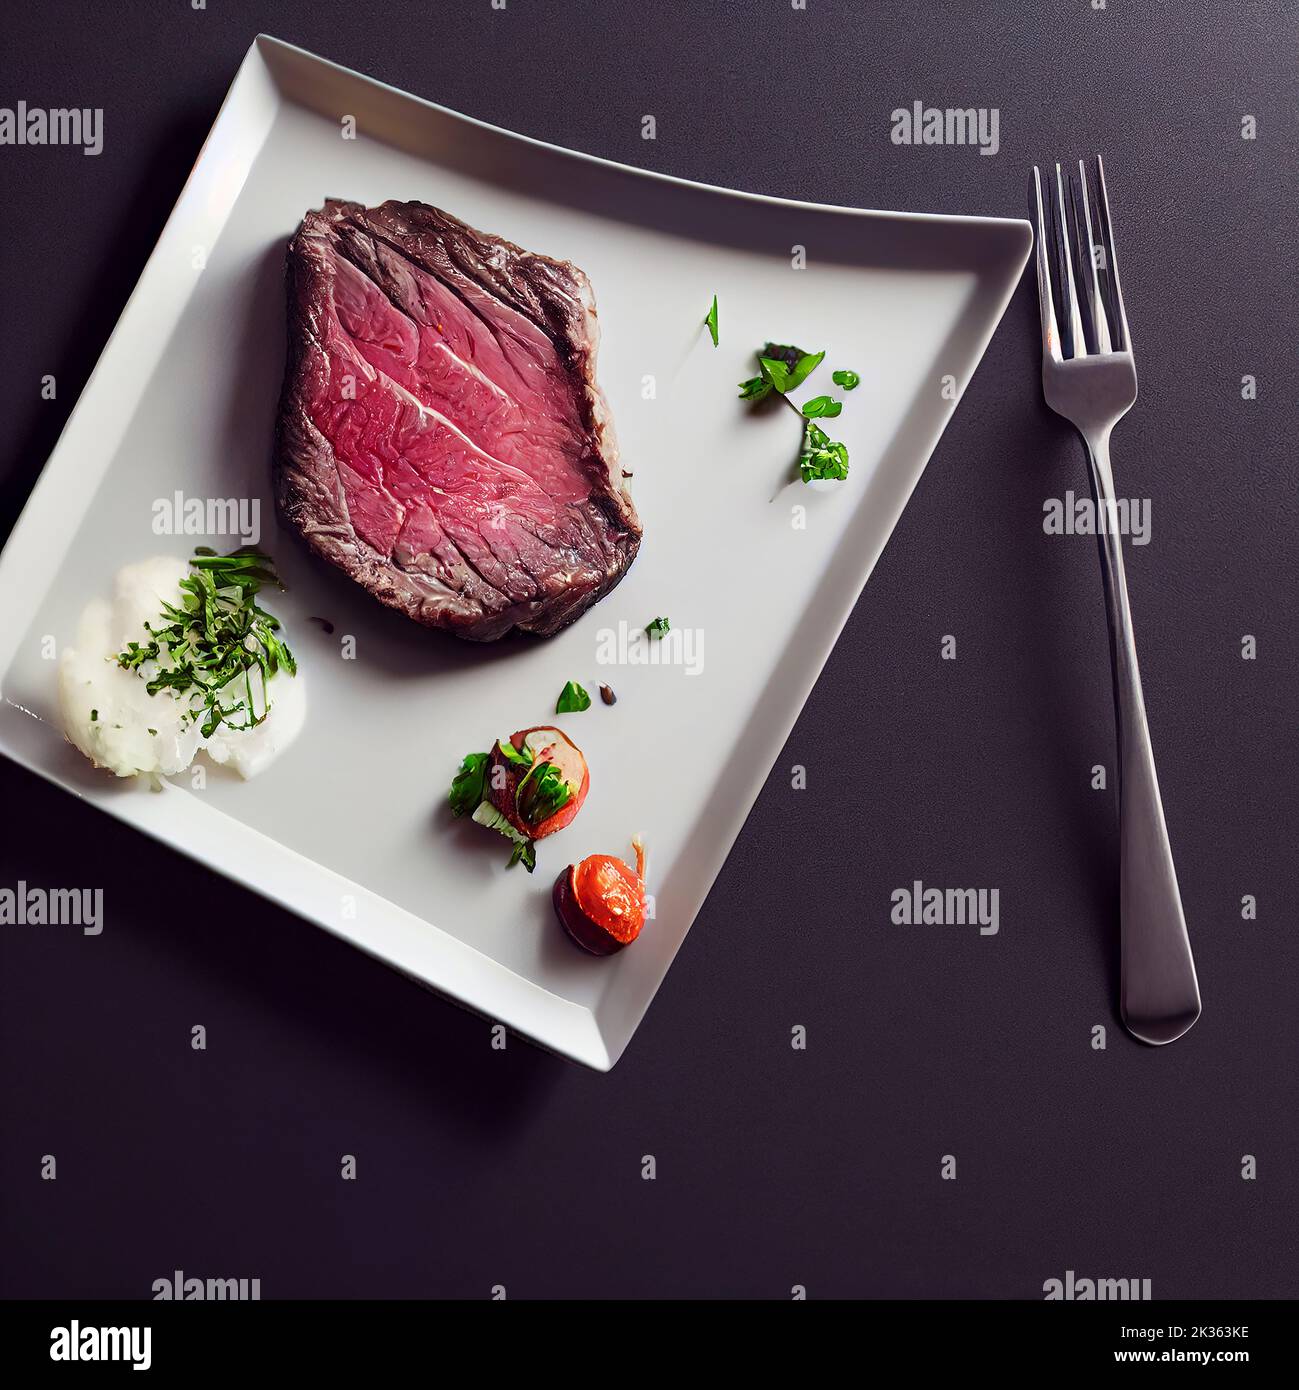 Beautifully plated steak and condiments on black background, flat lay, food photography and illustration Stock Photo